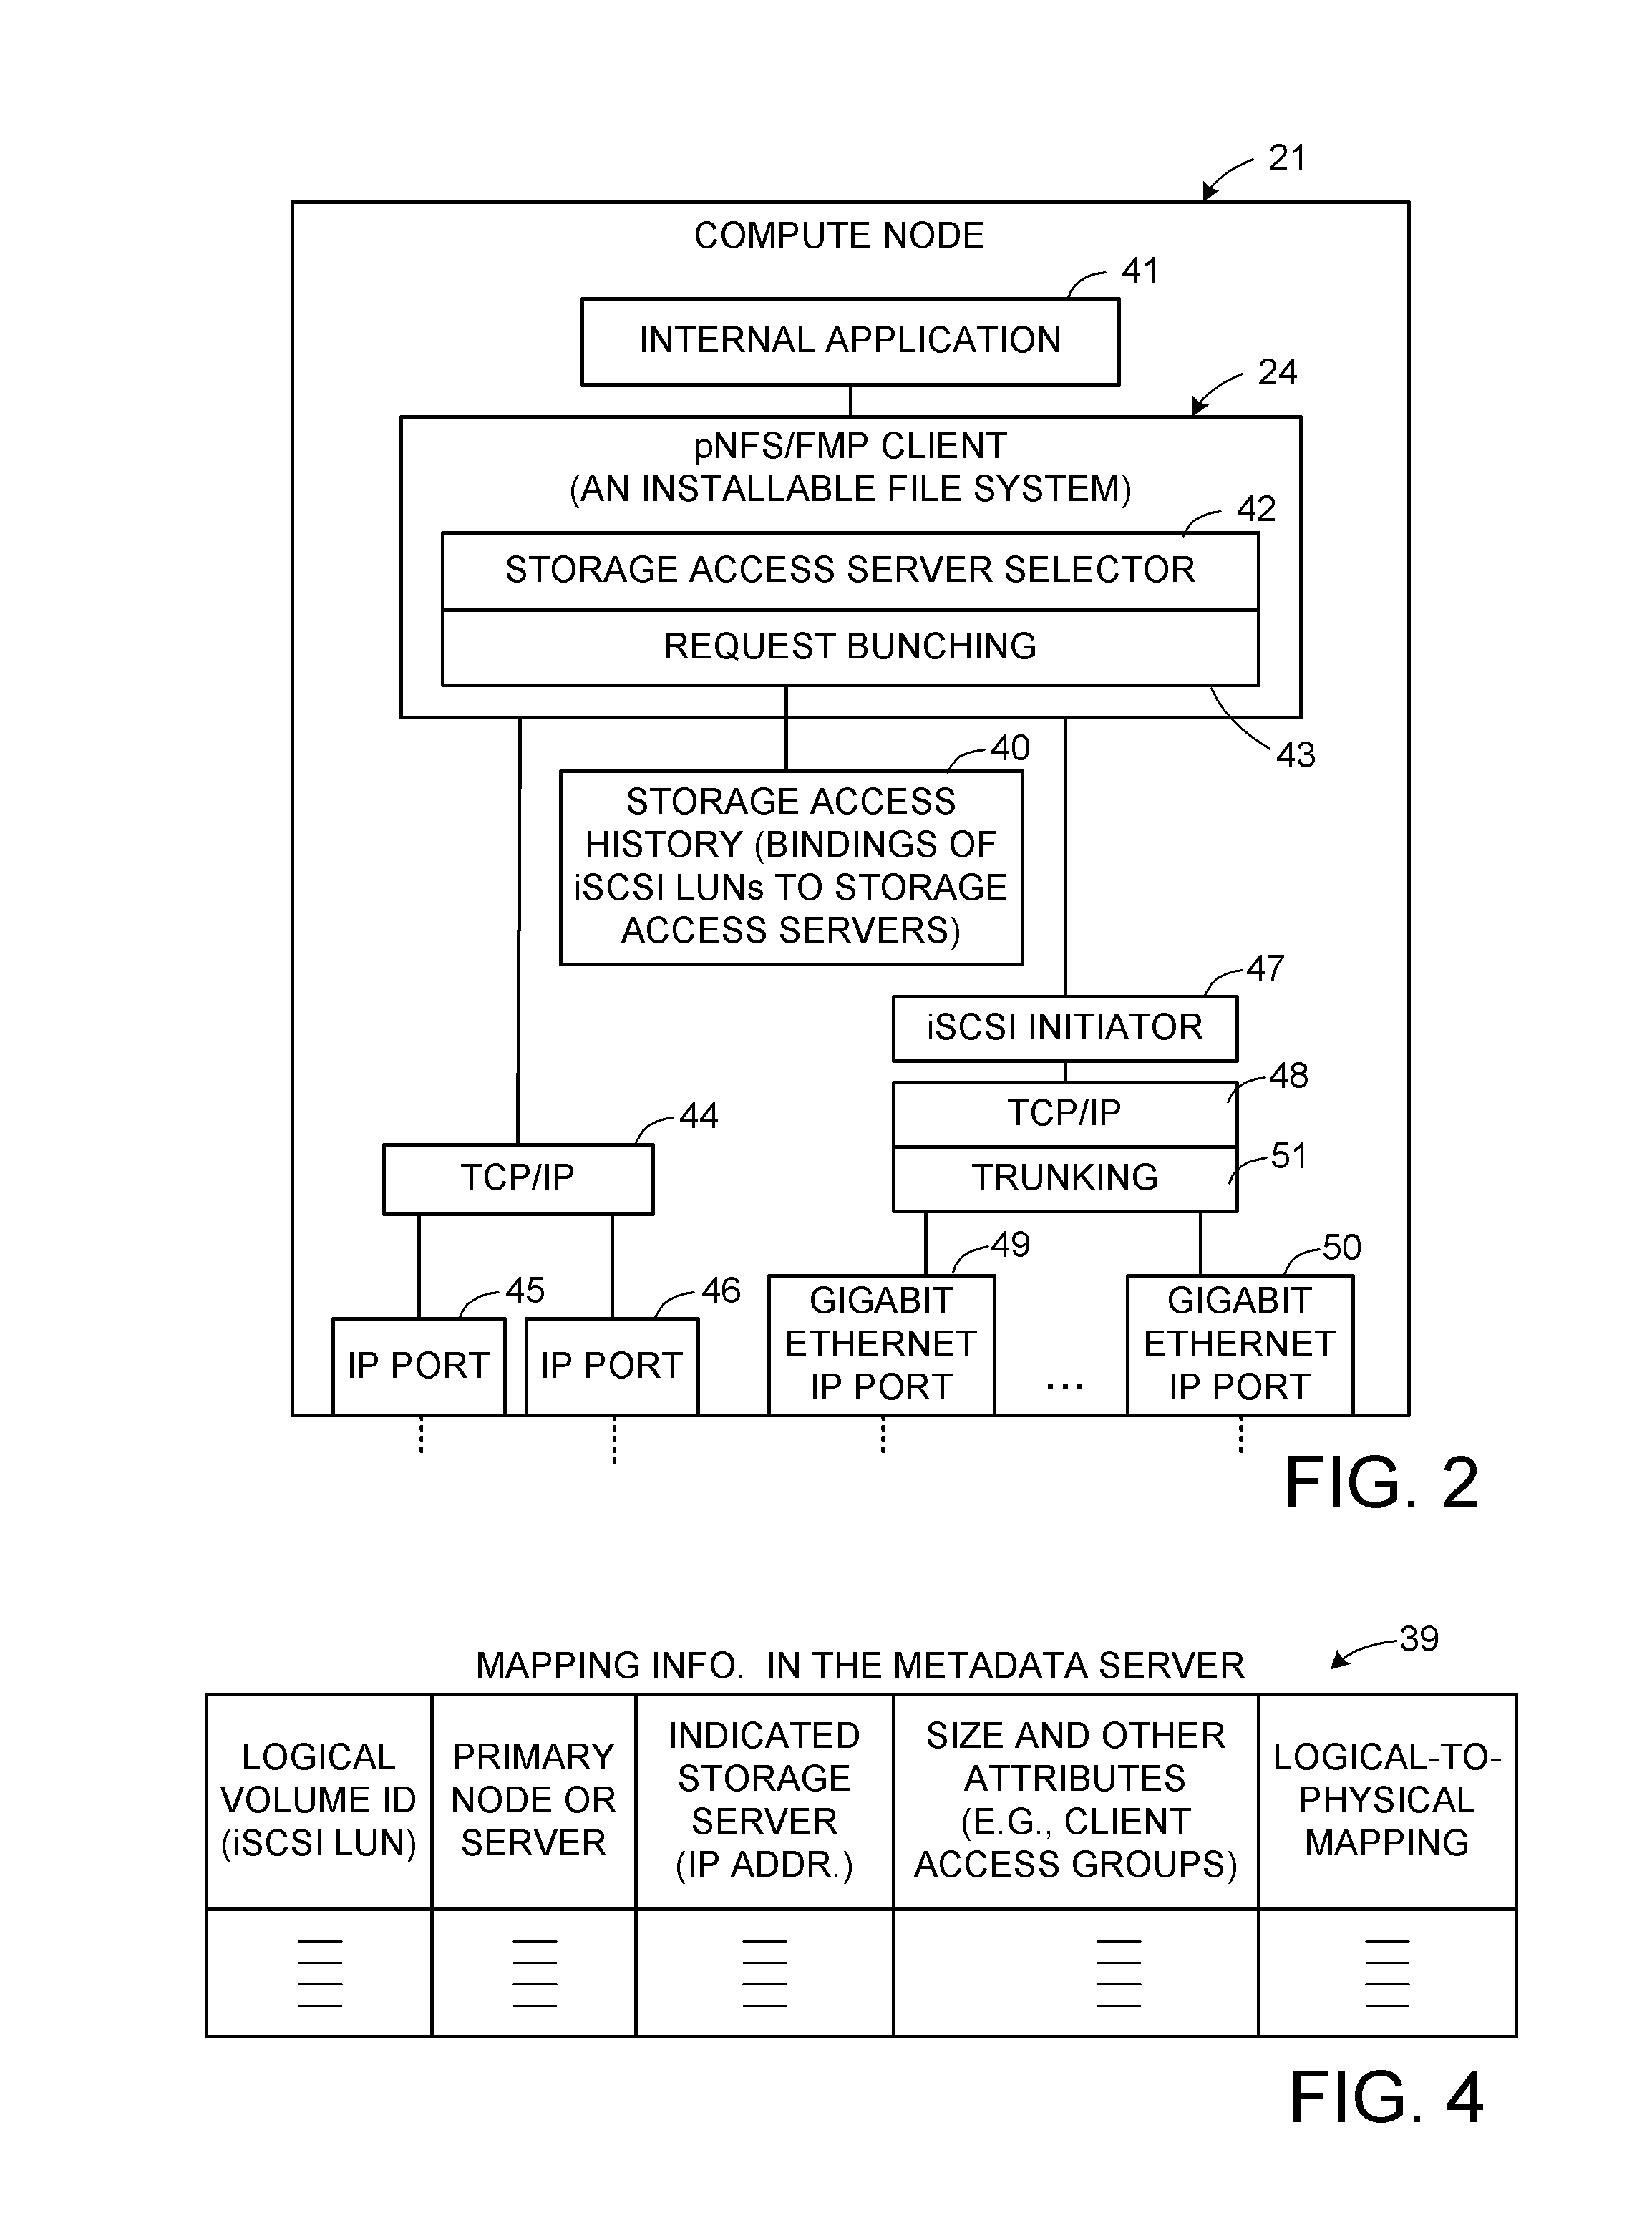 Asymmetric data storage system for high performance and grid computing